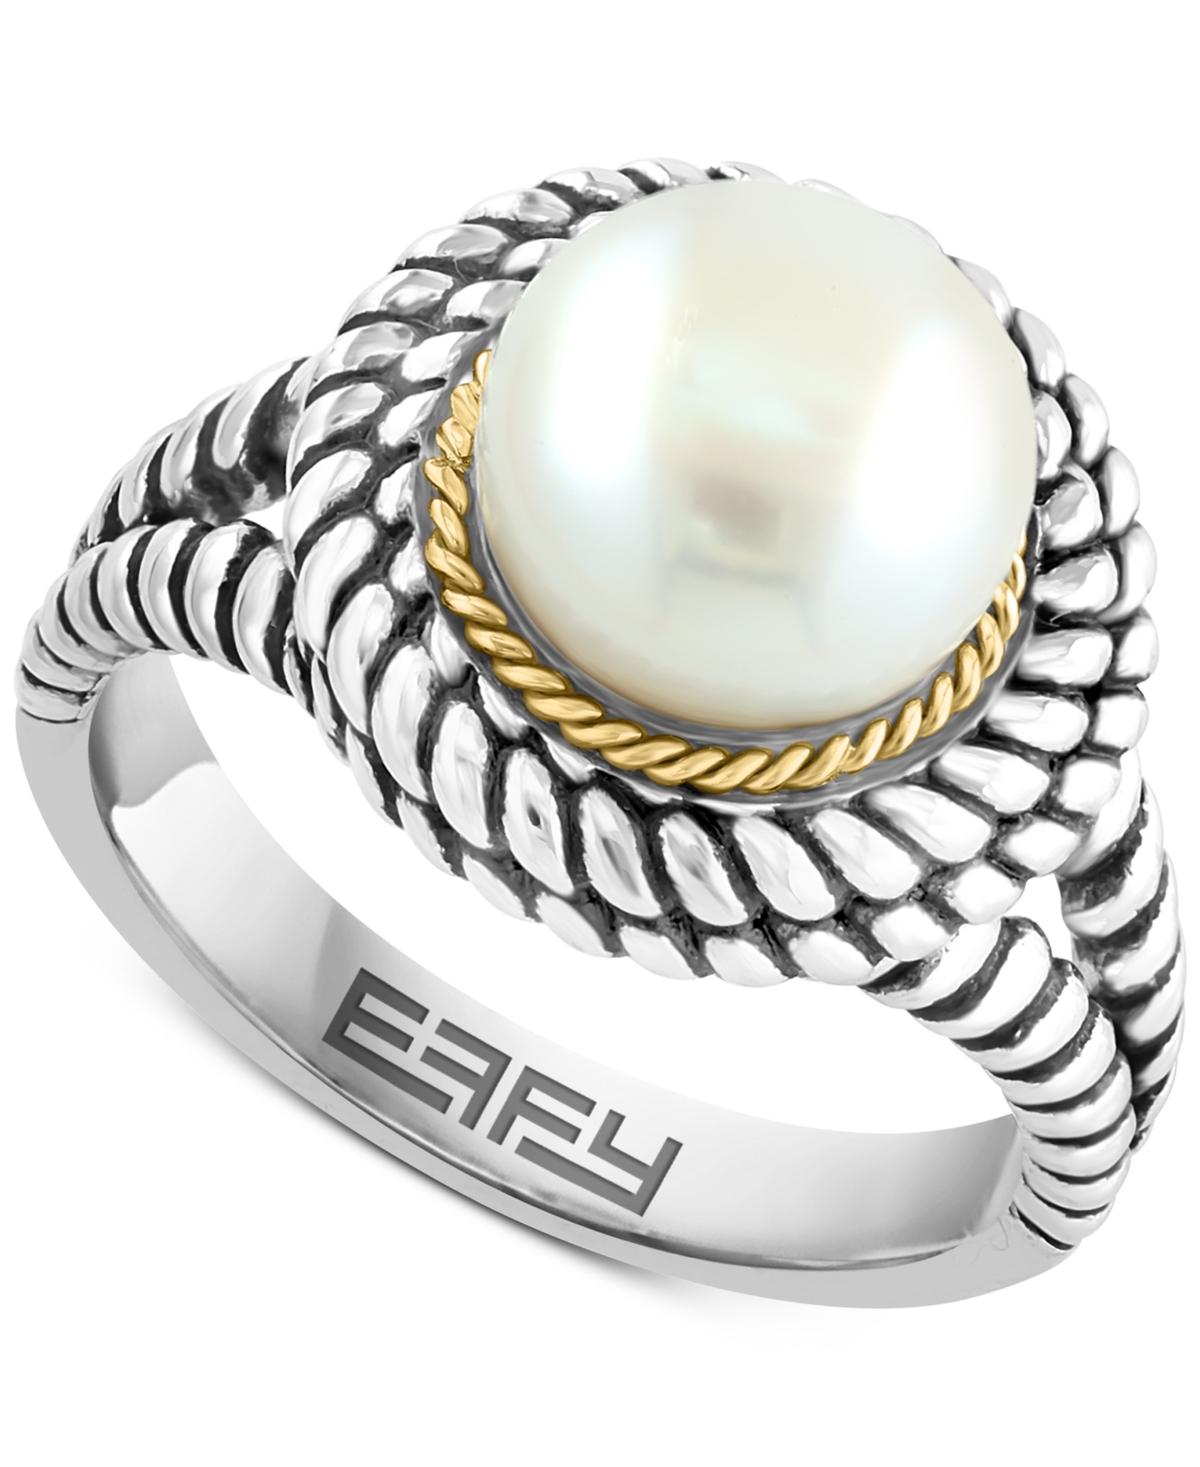 Effy Freshwater Pearl (9mm) Statement Ring in Sterling Silver & 18k Gold-Plate - K Gold Over Sterling Silver